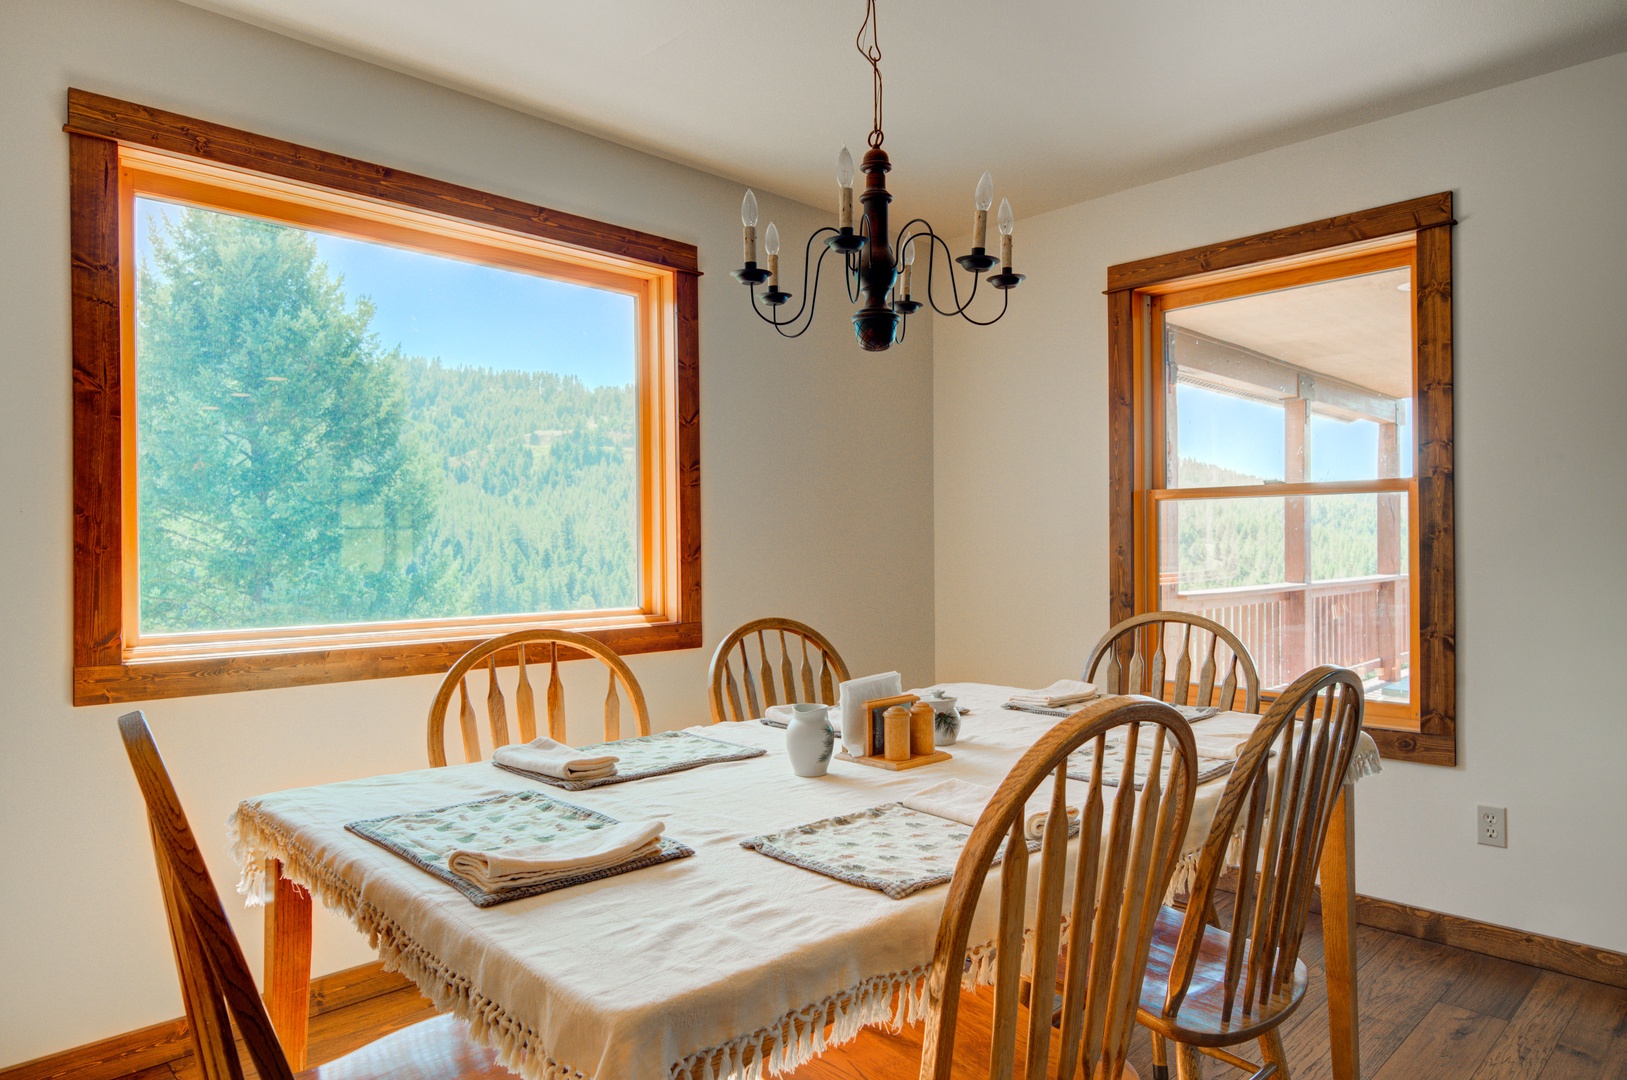 Bozeman Vacation Rentals, The Canyon Lookout - Dining with a view